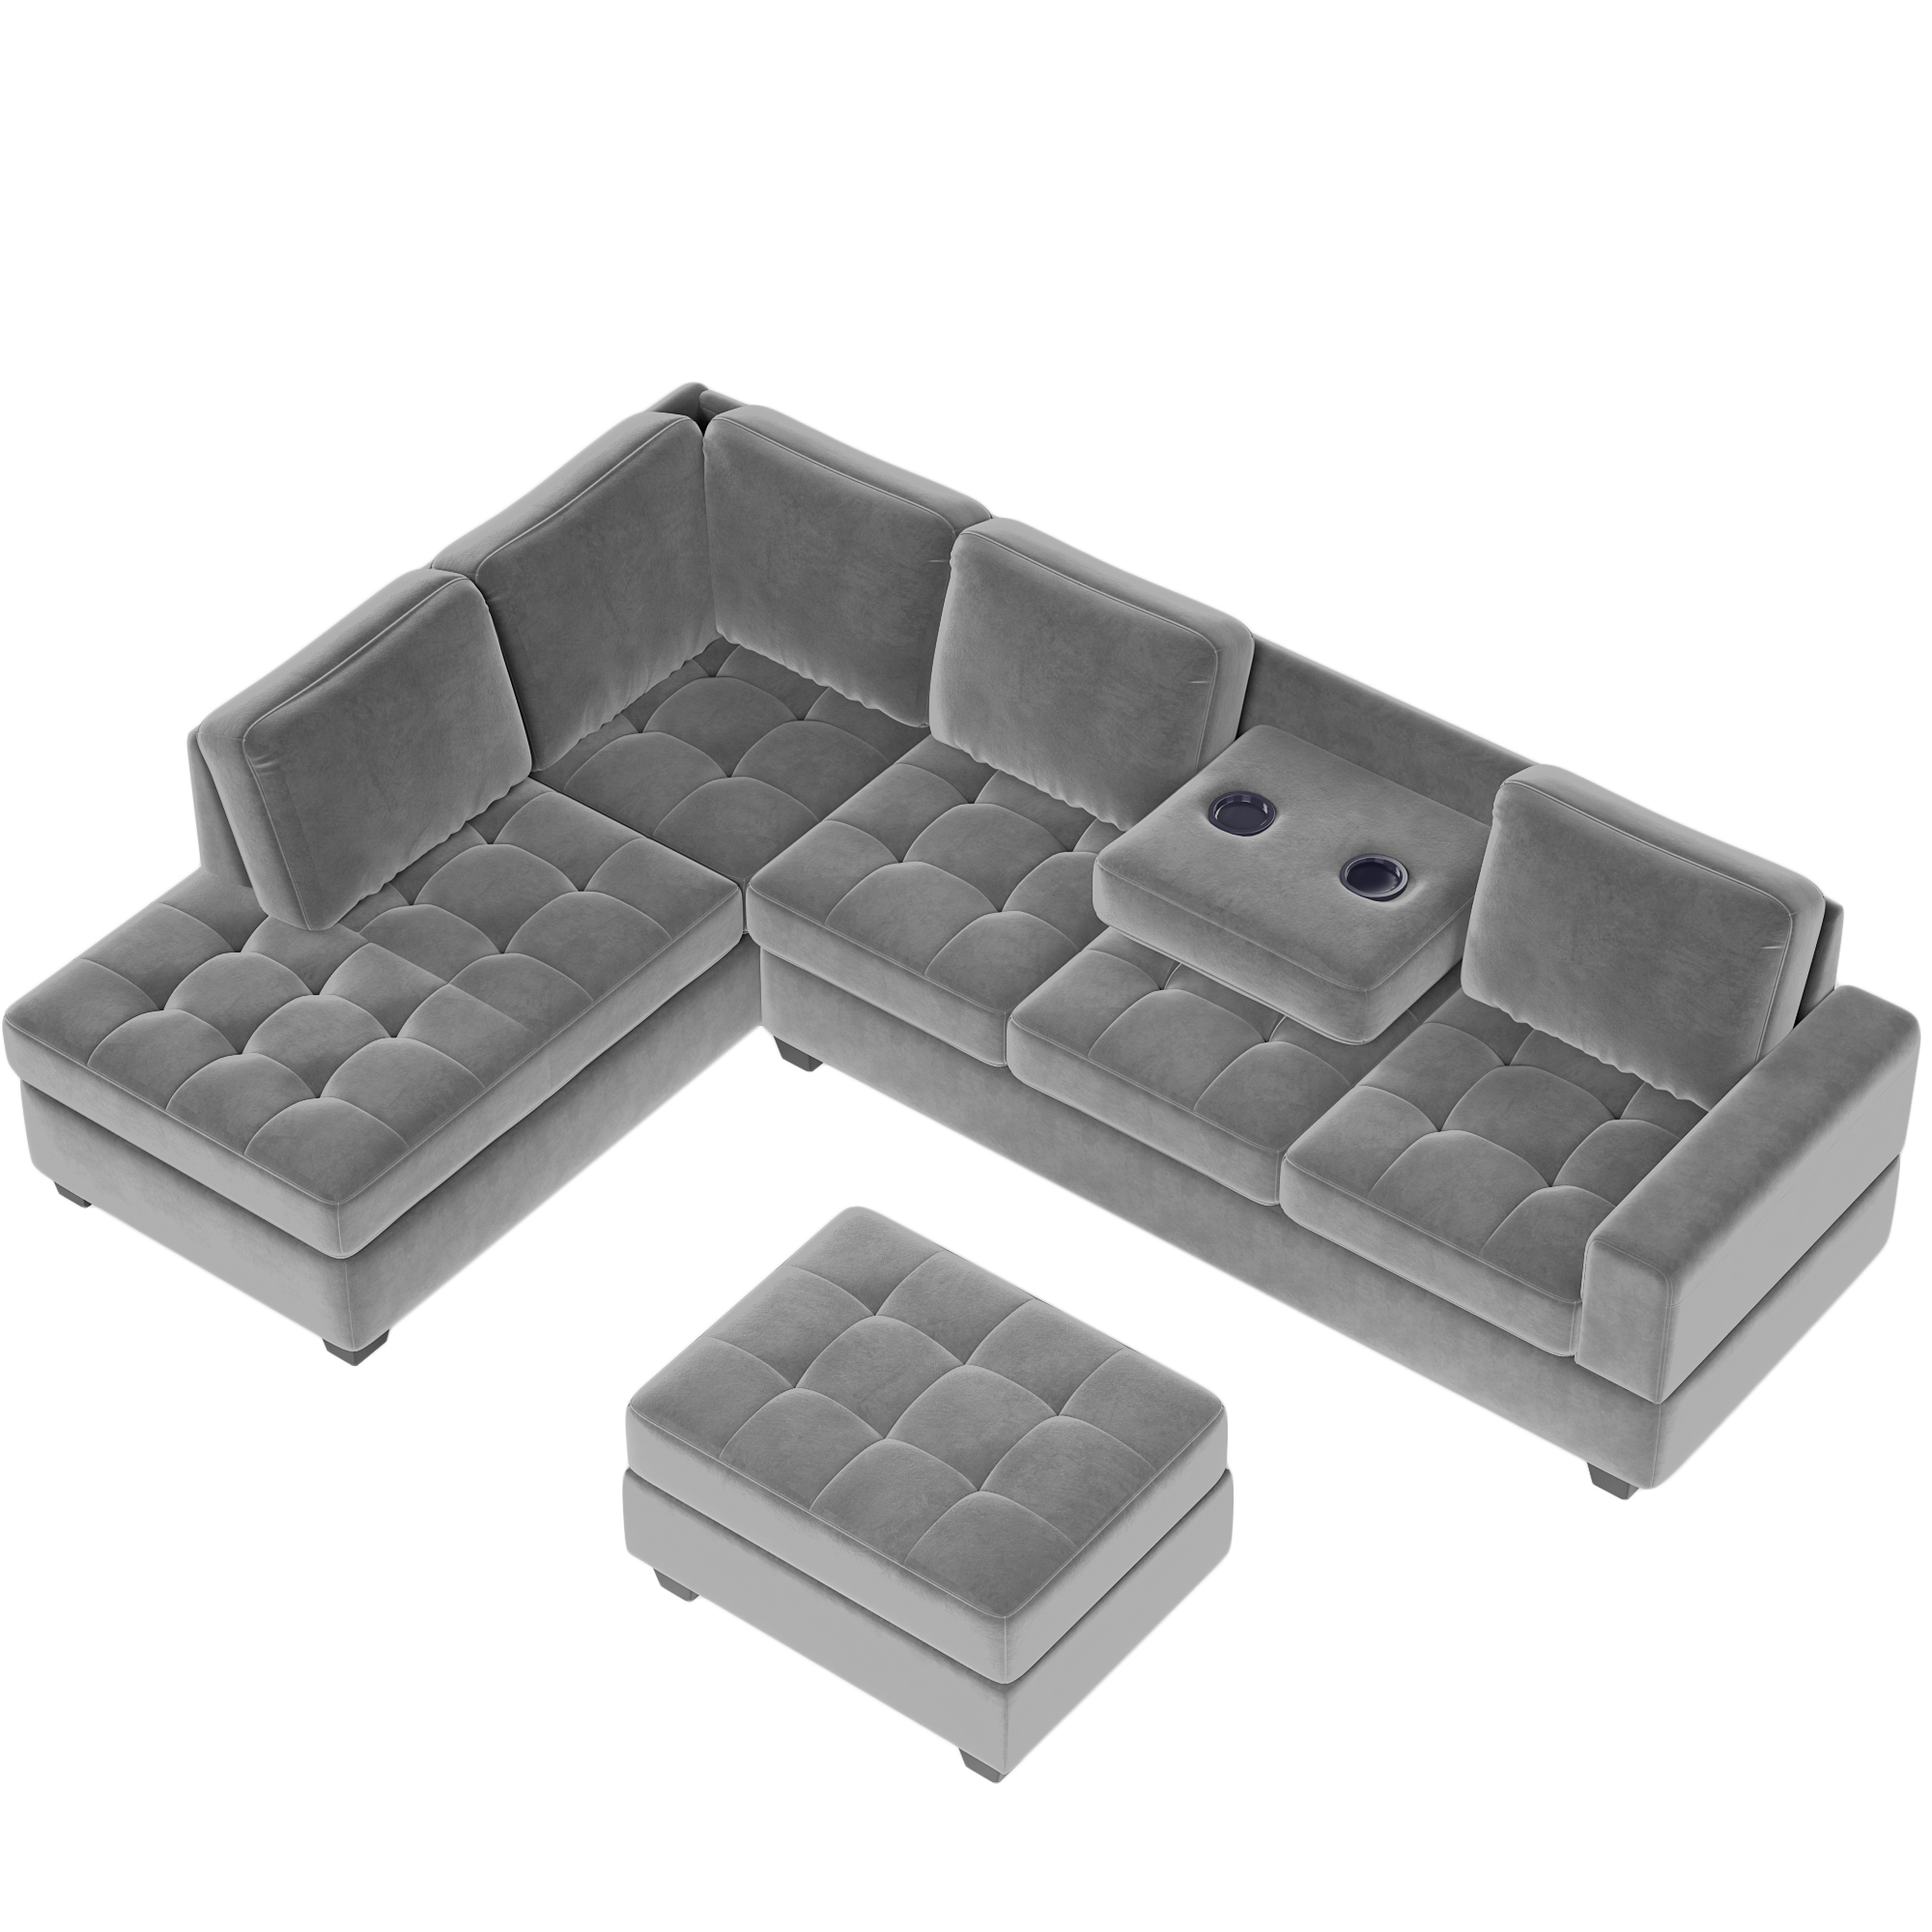 L-Shaped Couch Set With Storage Ottoman And Two Cup Holders - SG000410AAA